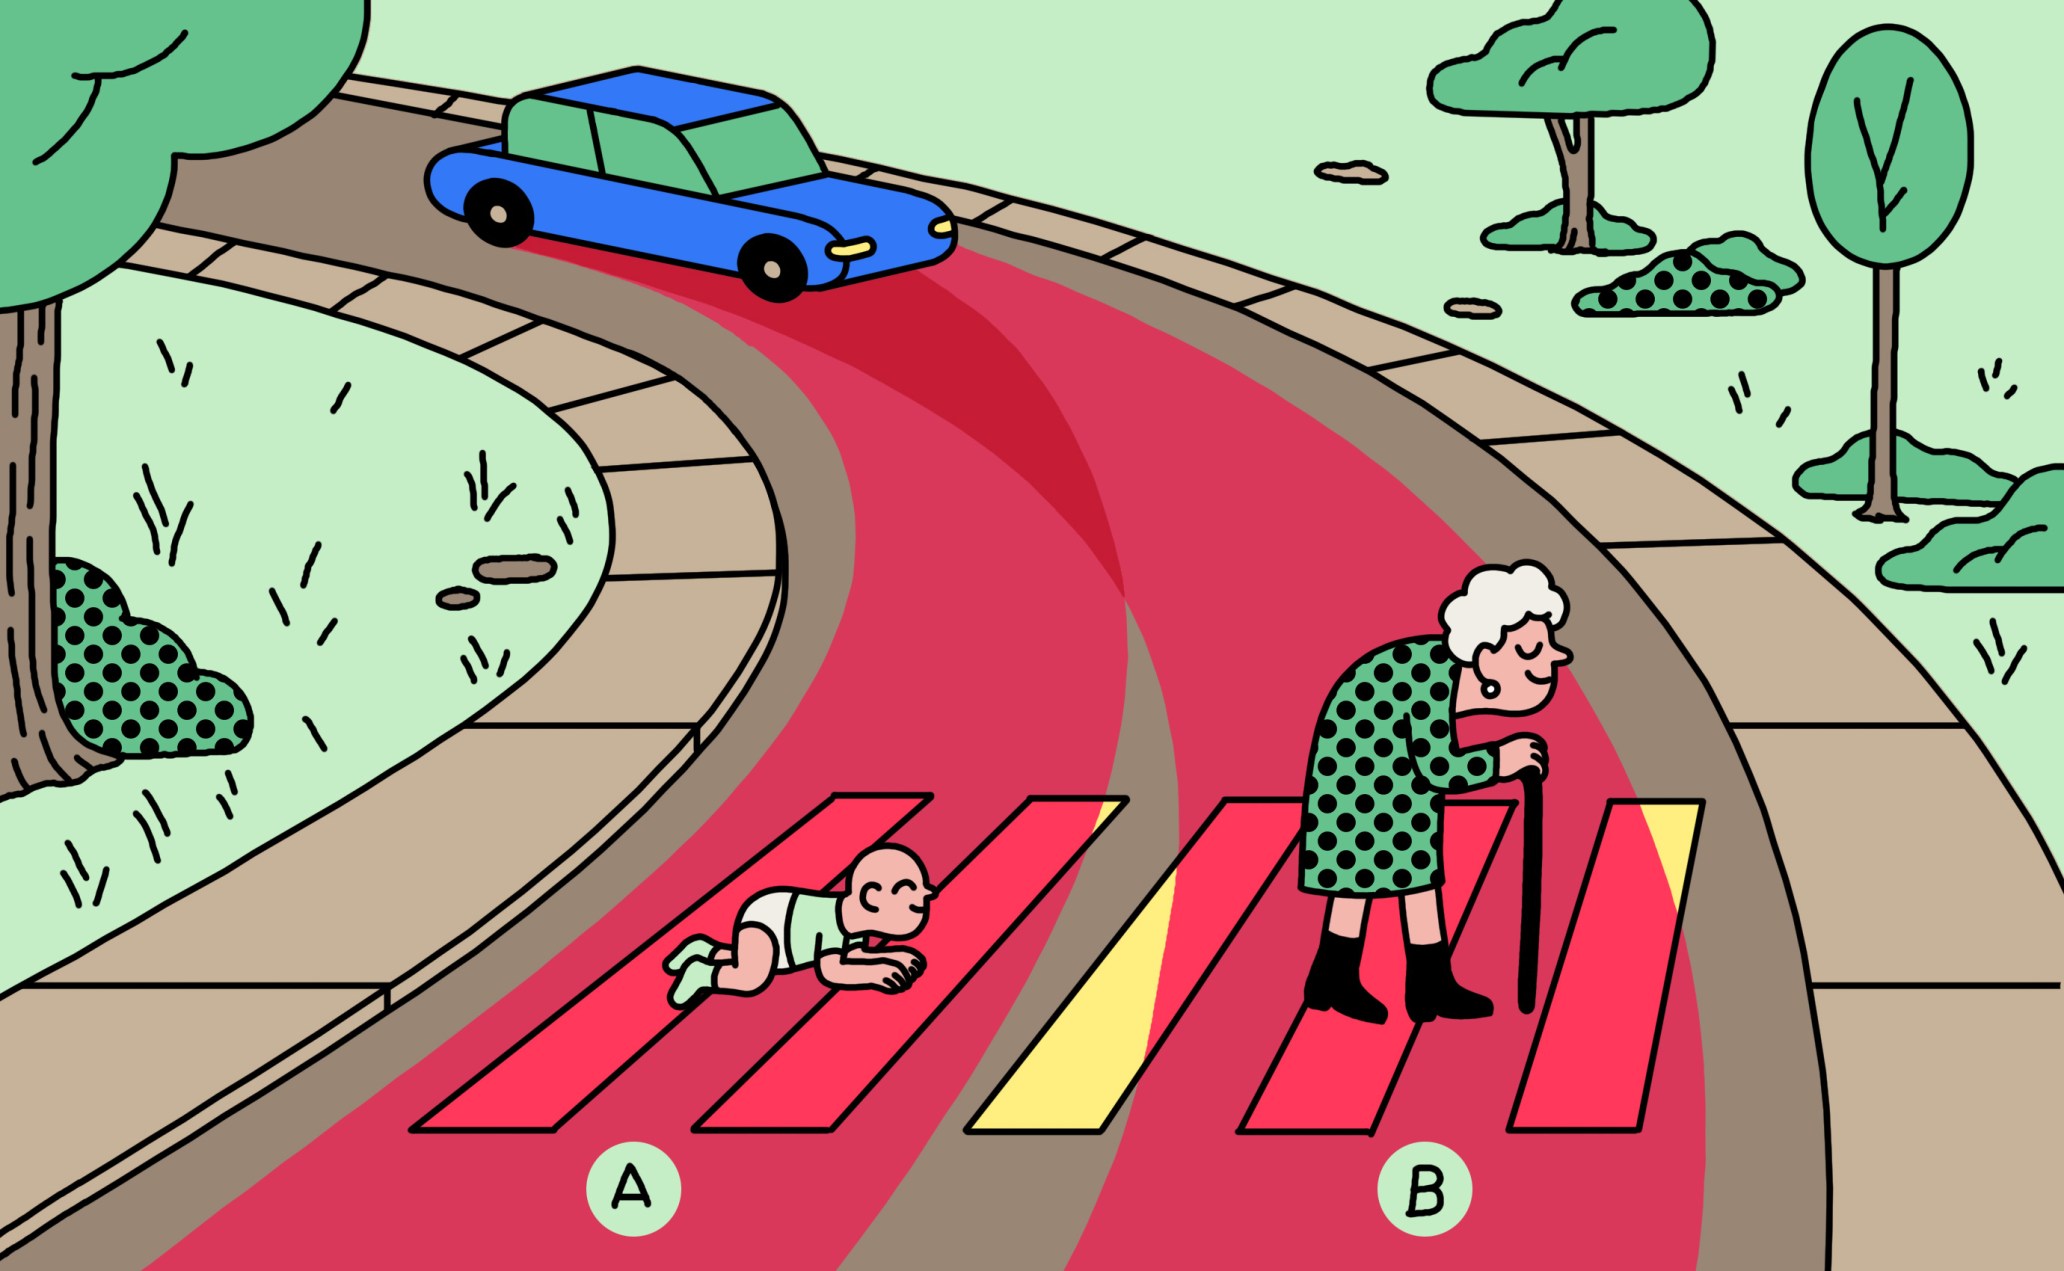 Should a self-driving car kill the baby or the grandma? Depends on where you’re from.